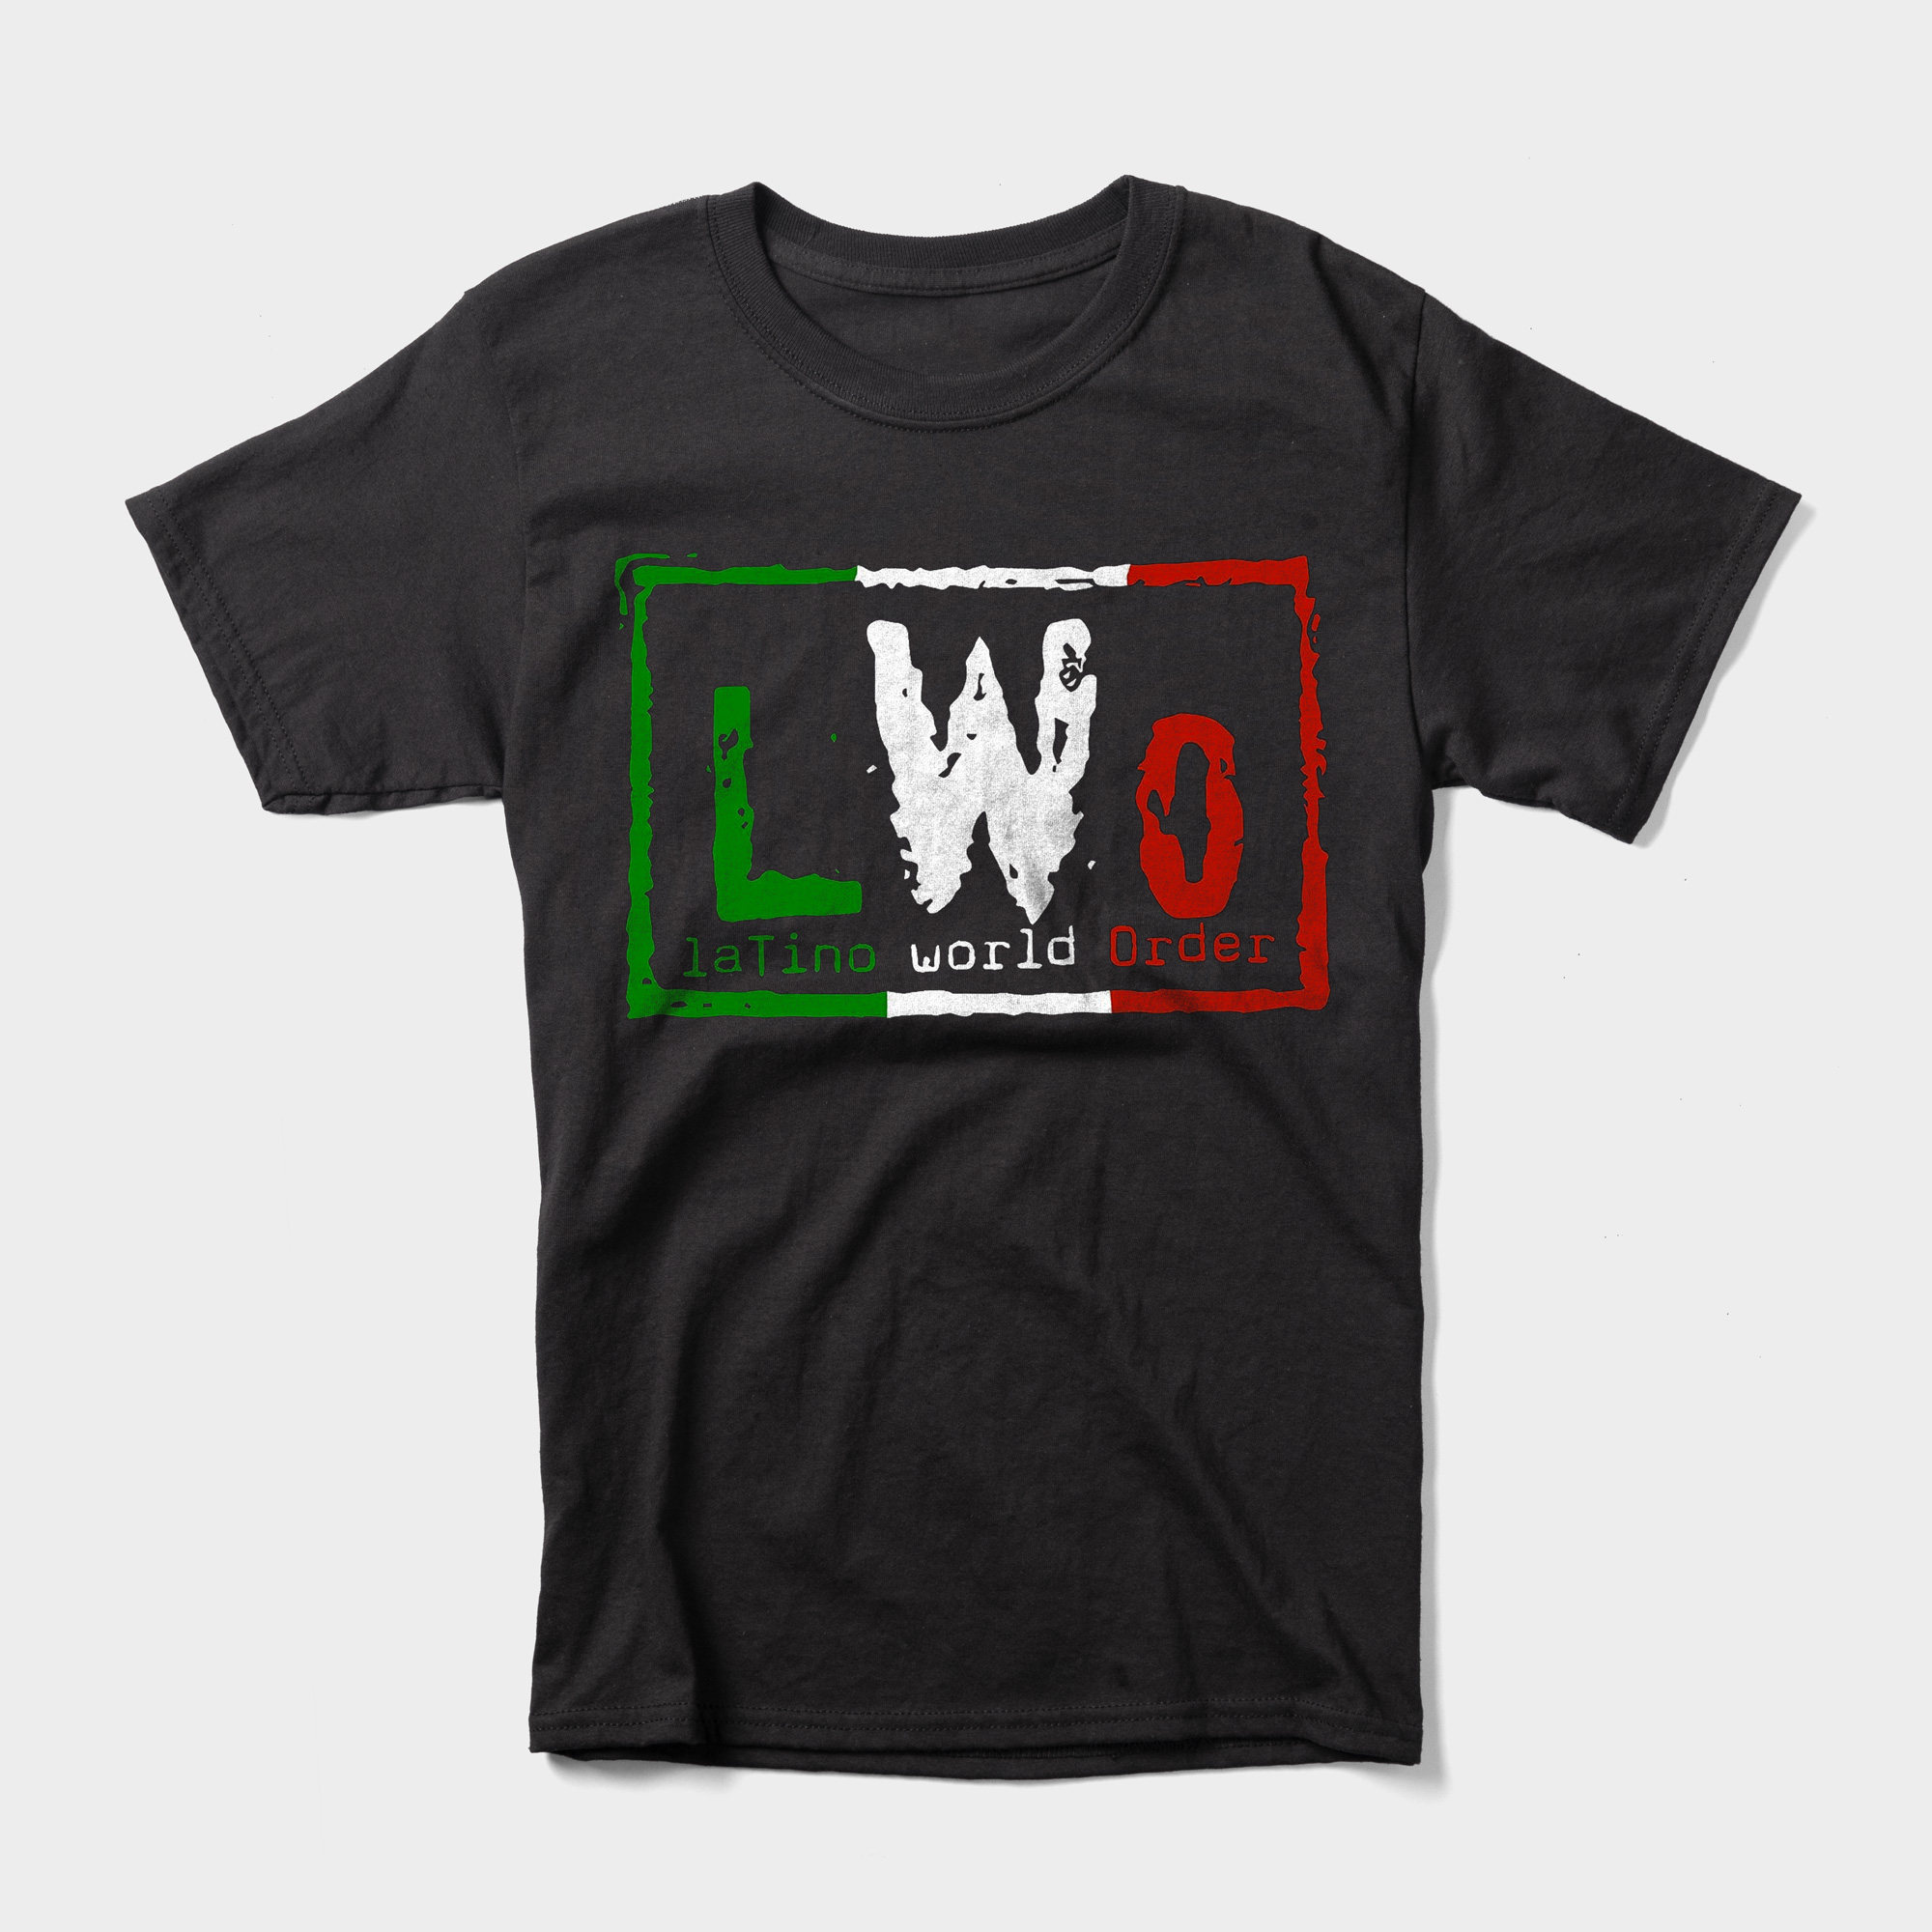 The Latino World Order shirt uses the same design as the New World Order but in the style of the flag of Mexico. 